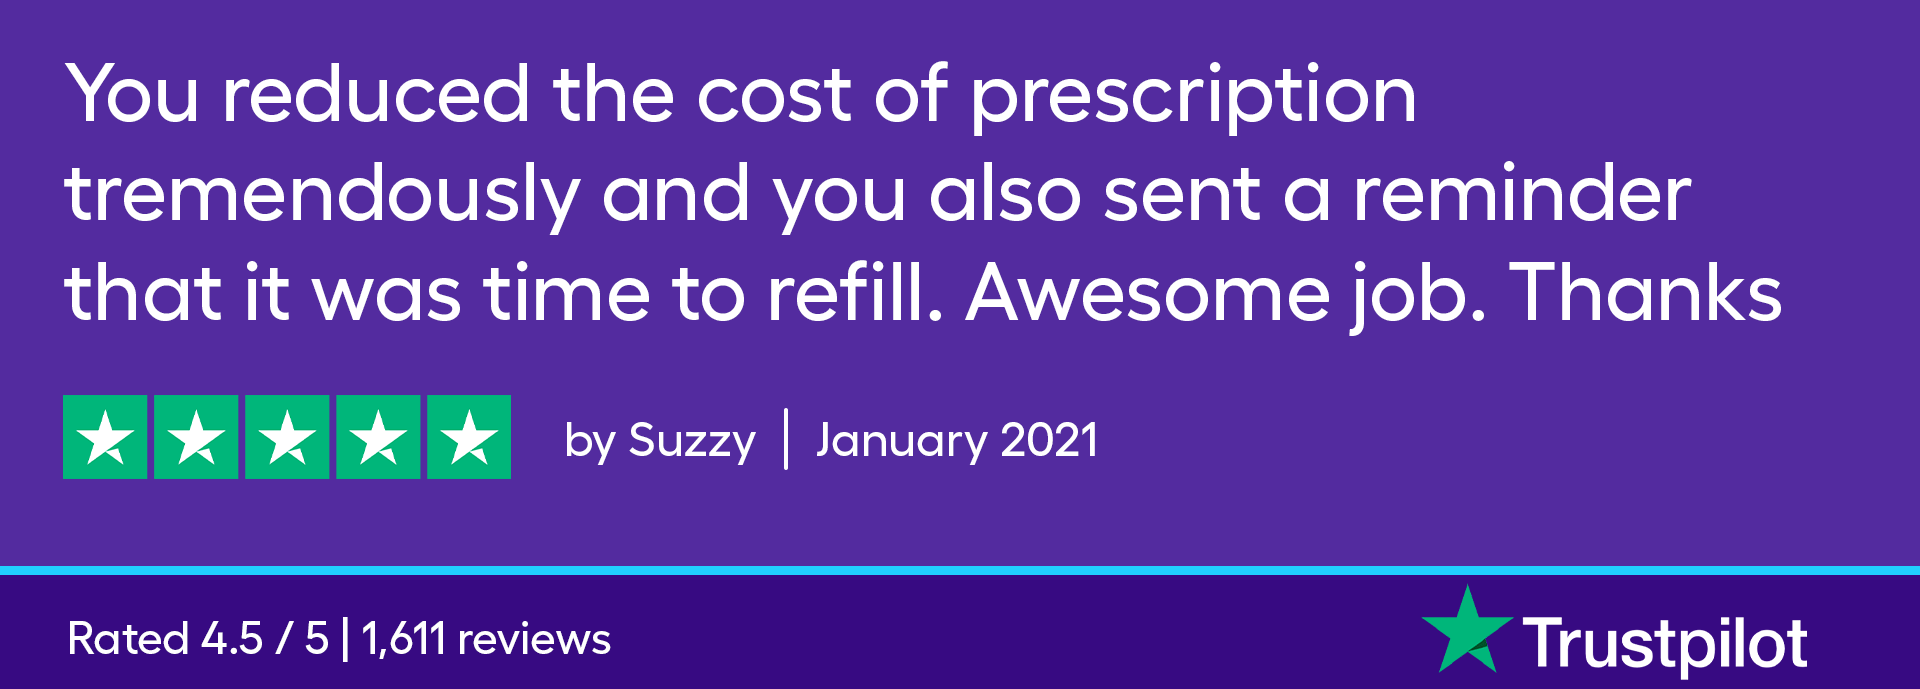 You reduced the cost of prescription tremendously and you also sent a reminder that it was time to refill. Awesome job. Thanks.